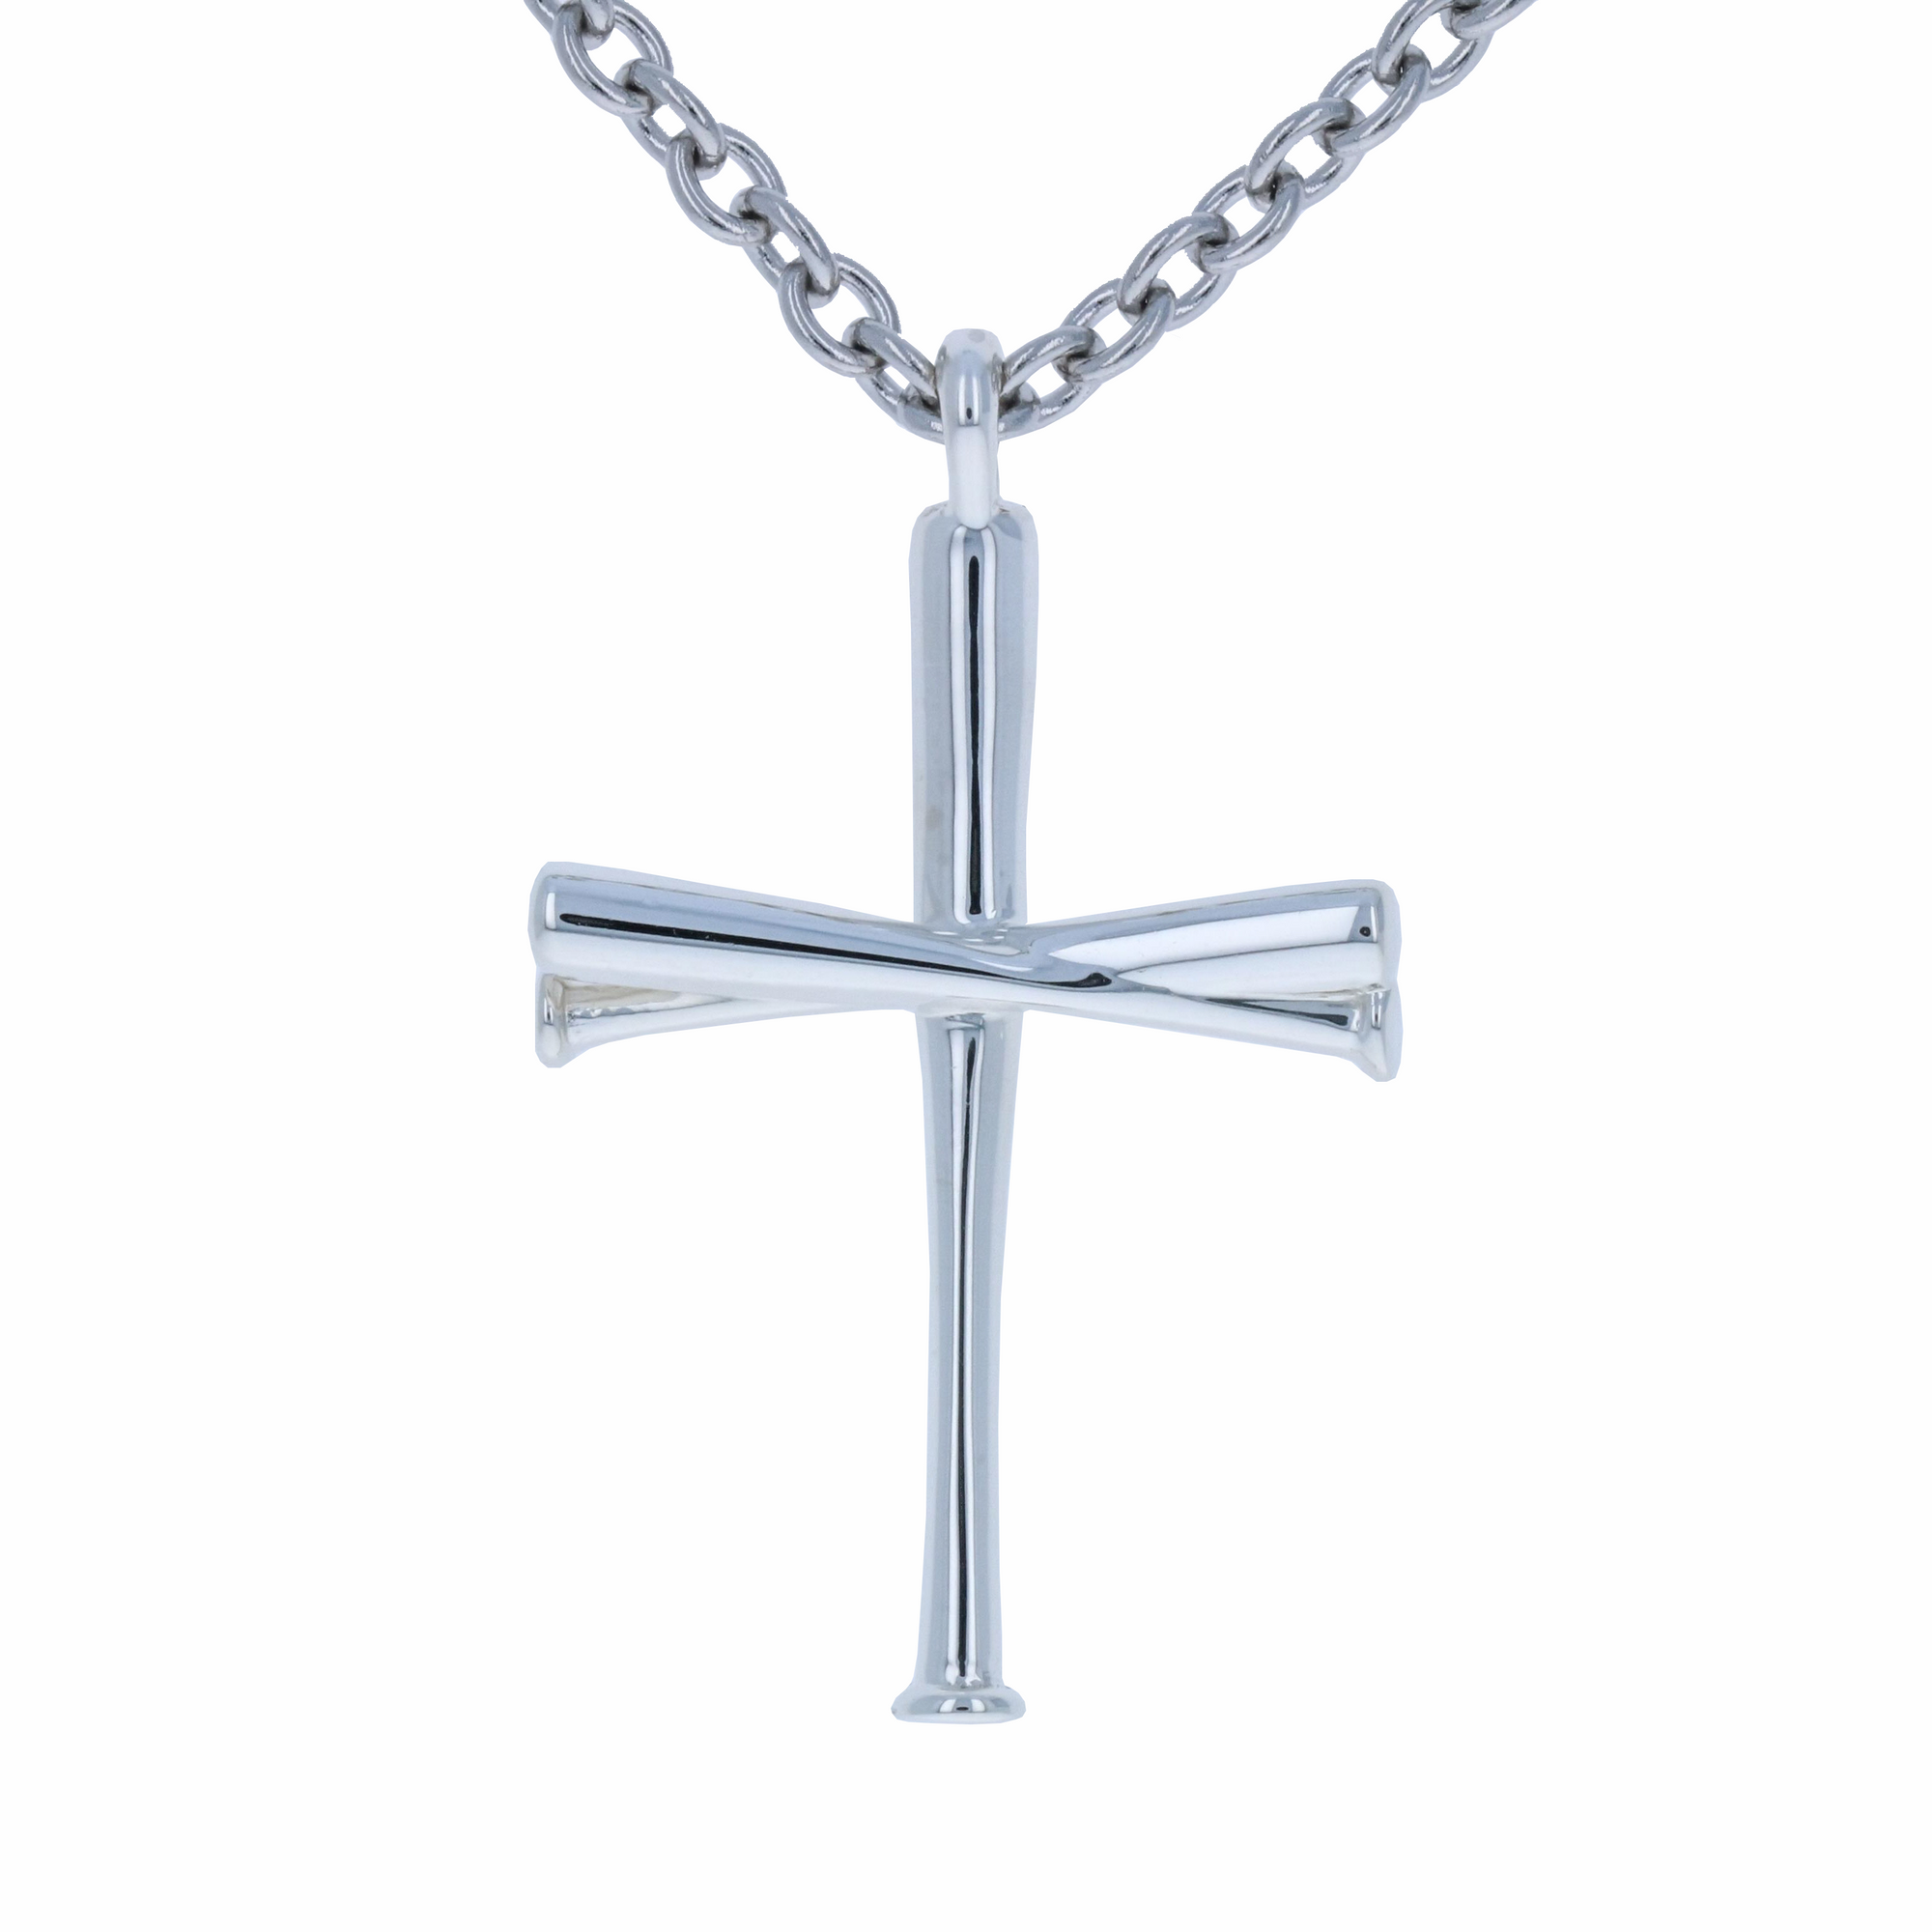 Buy Athletes Cross Necklace Pendant Sports Stainless Steel Baseball Number  and Silver Baseball Bat Cross Necklaces for Men(Silver,23) at Amazon.in